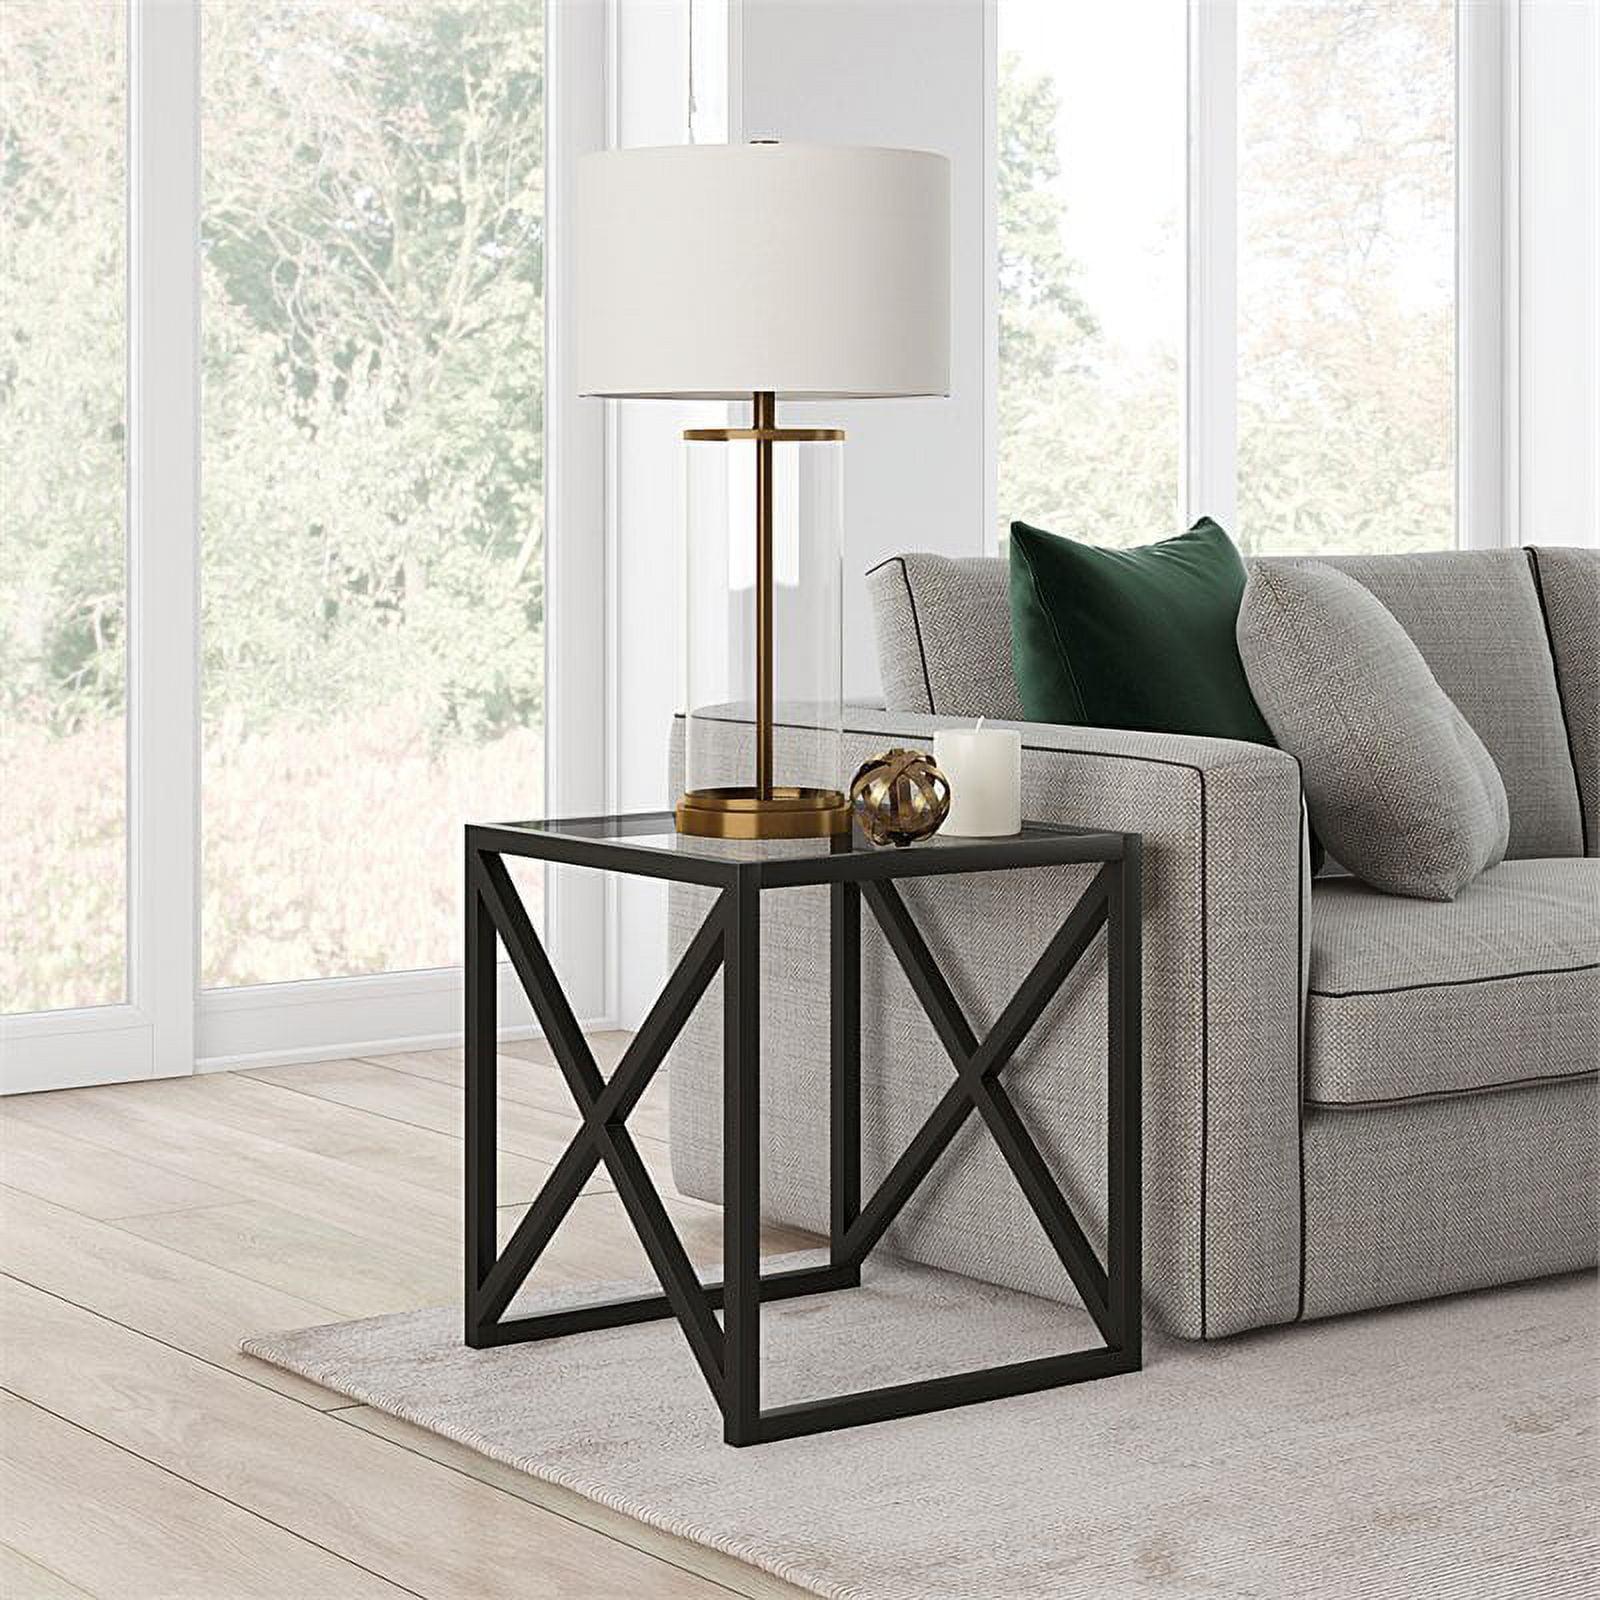 Calix 20" Blackened Bronze Glass Side Table with Storage